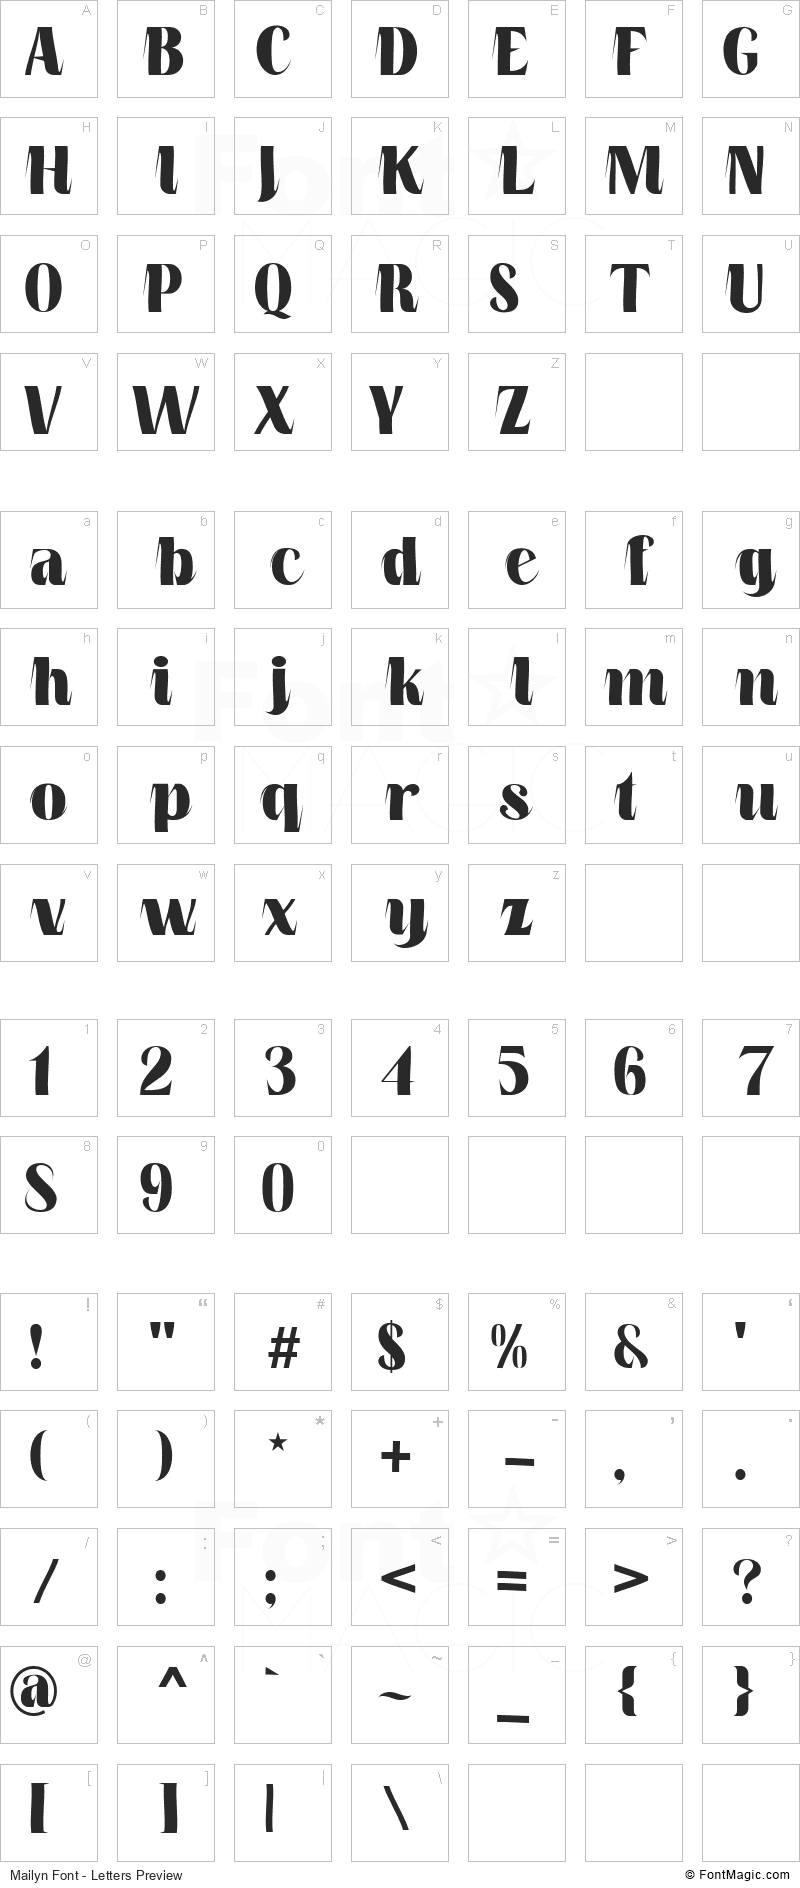 Mailyn Font - All Latters Preview Chart